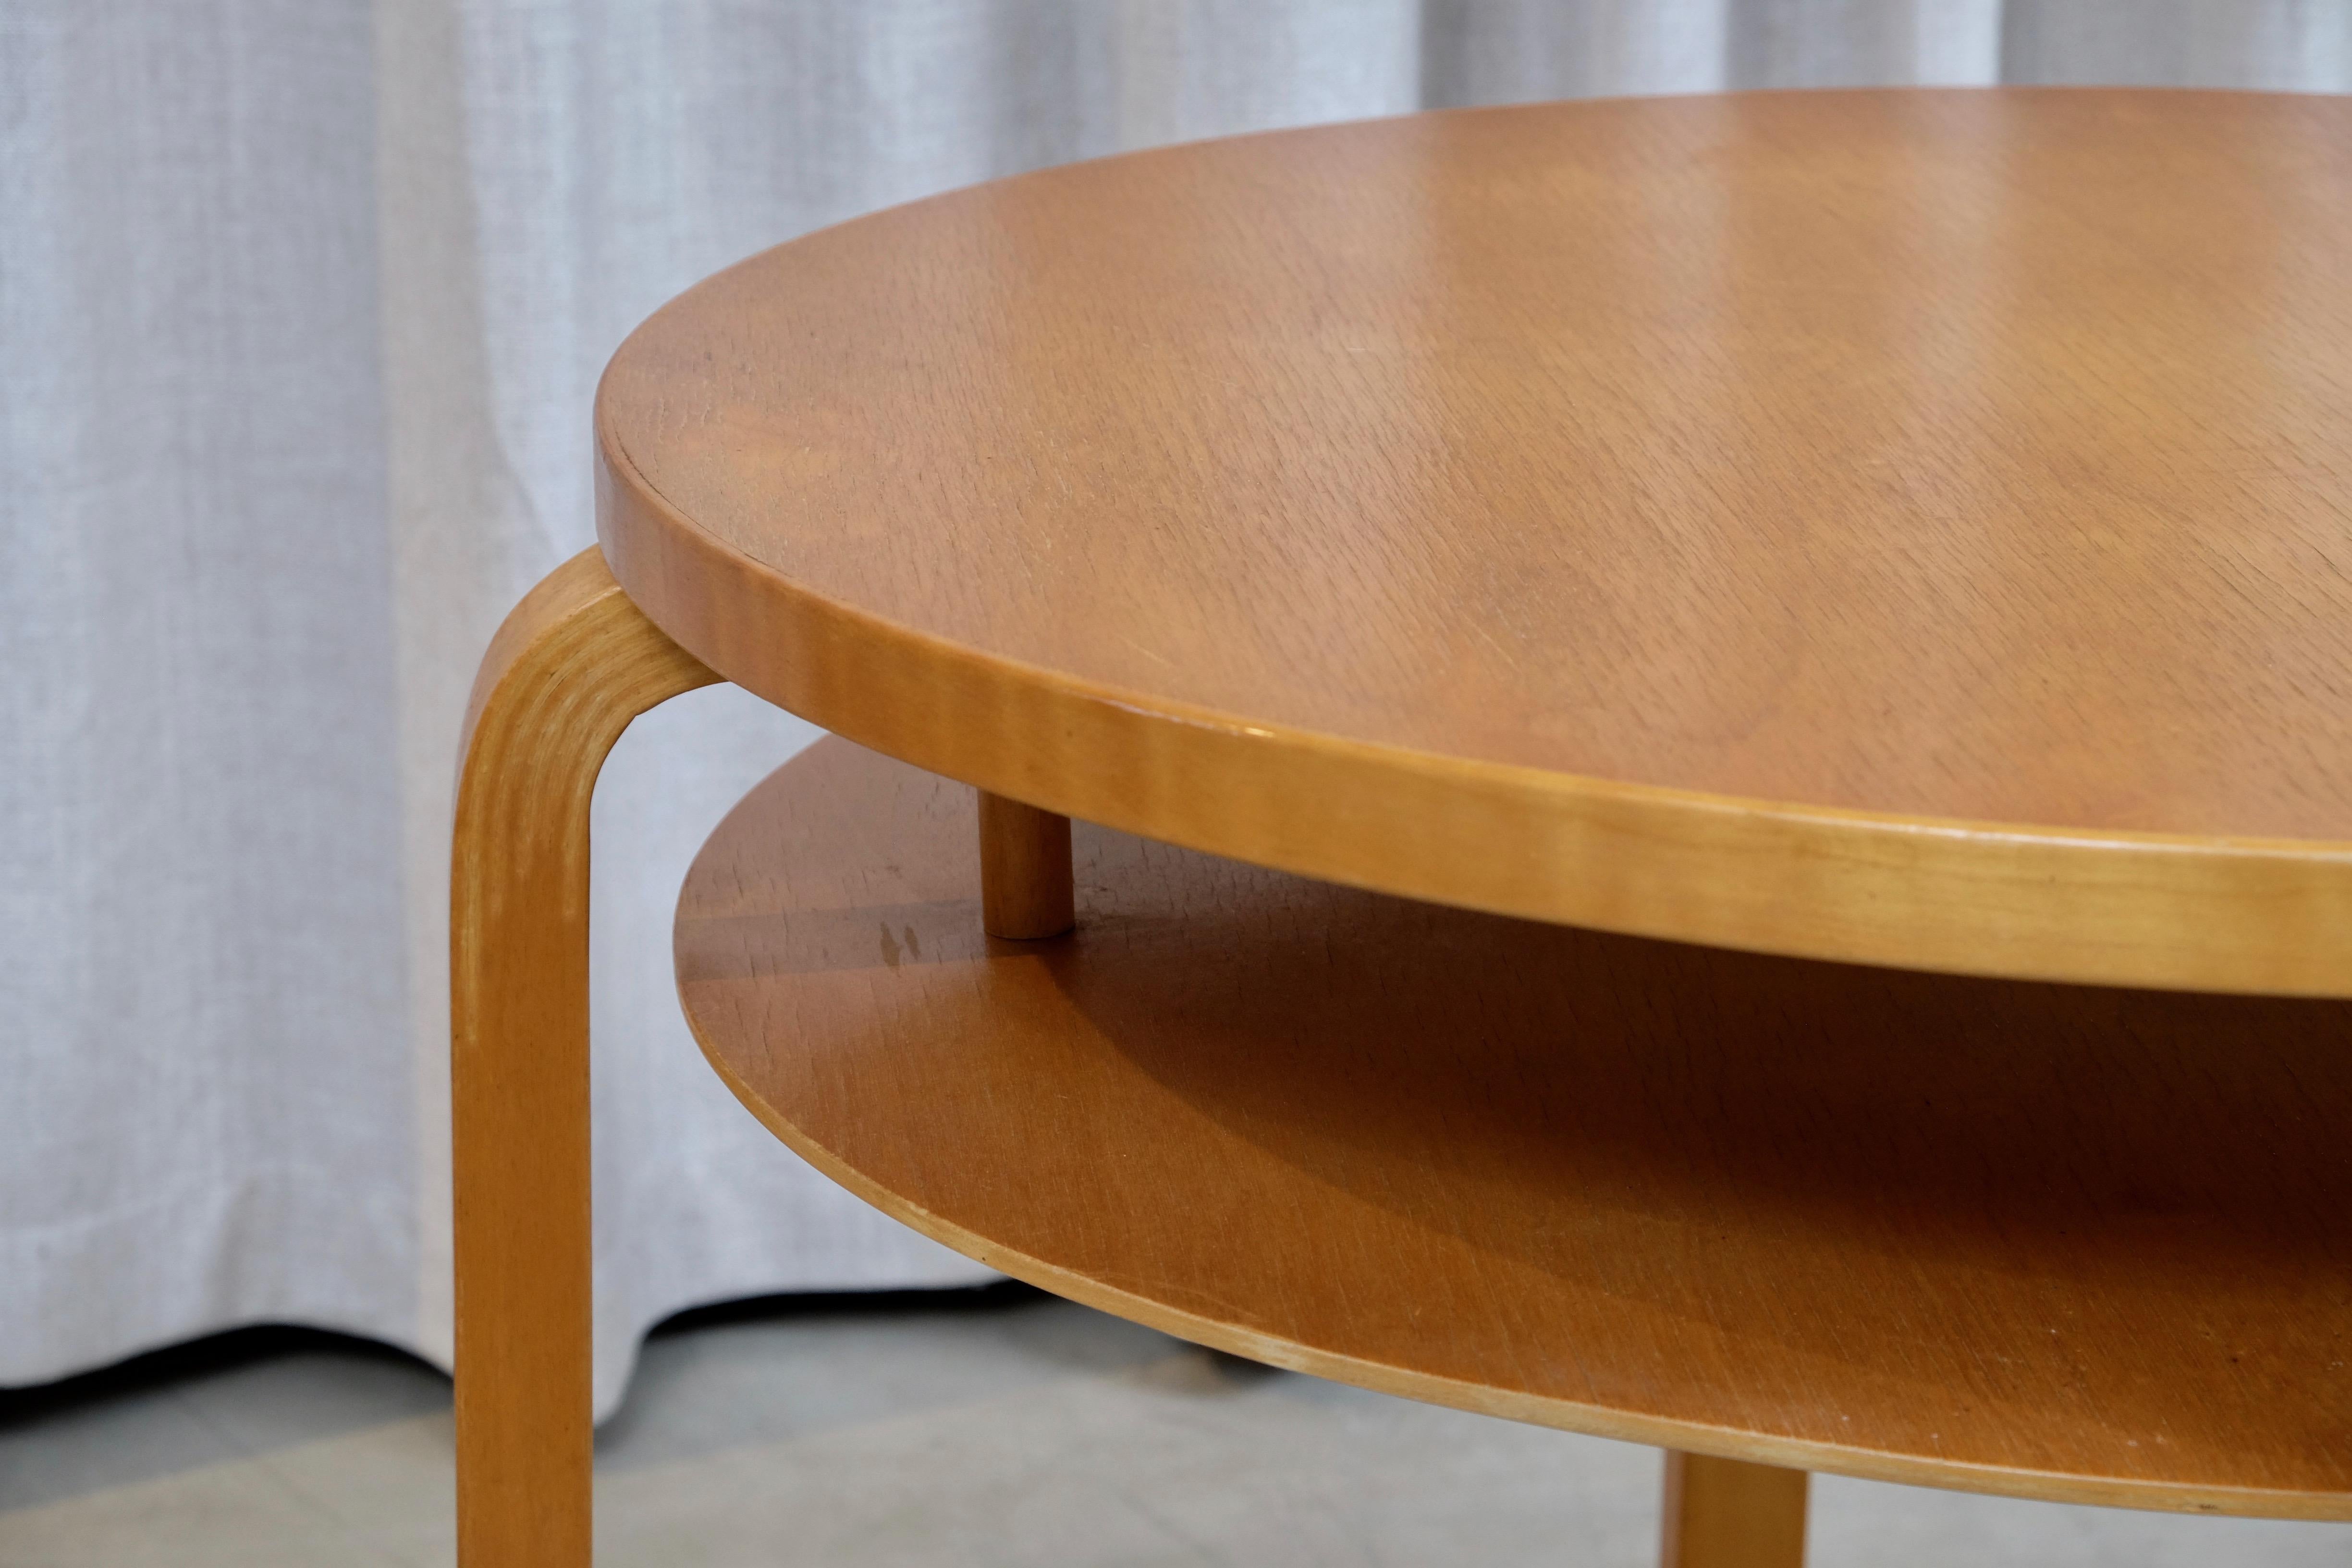 Alvar Aalto's innovative L-leg coffee table, double coffee table designed 1933. Elegant low birch table with its clever magazine shelf.
Produced by Artek in Hedemora late 1940s. (in production between 1946-1956 in Sweden by Artek due to WW2 in